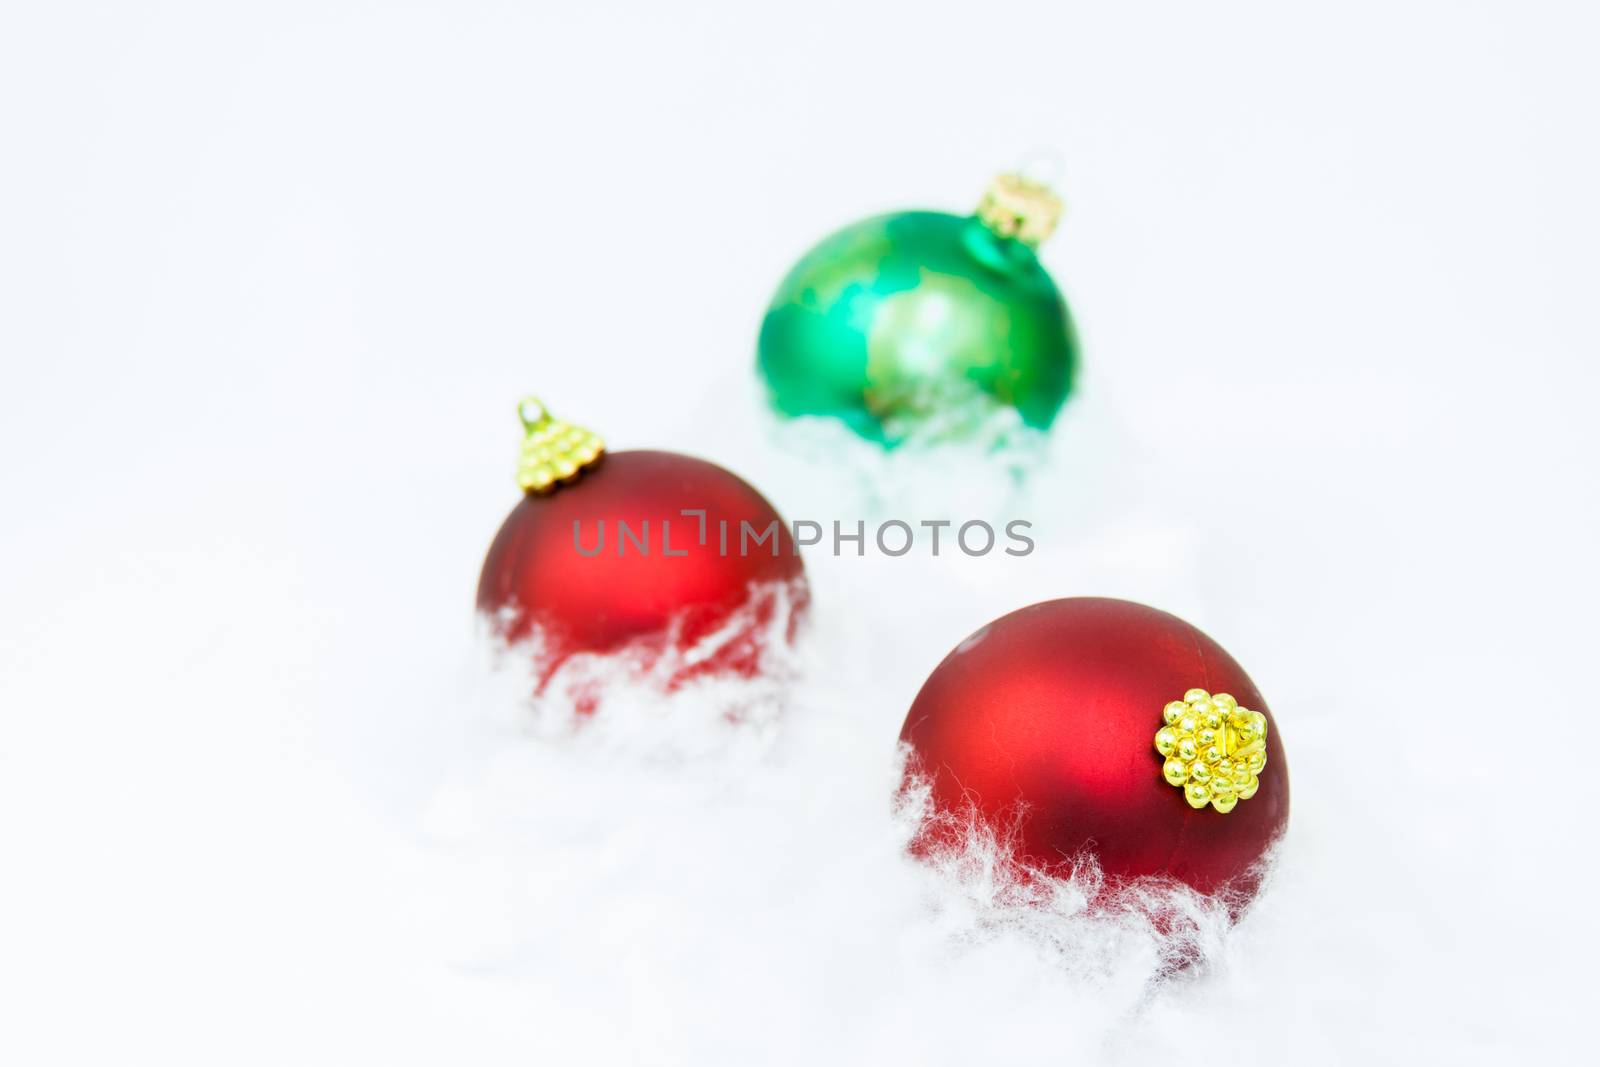 Isolated beautiful Christmas ornaments